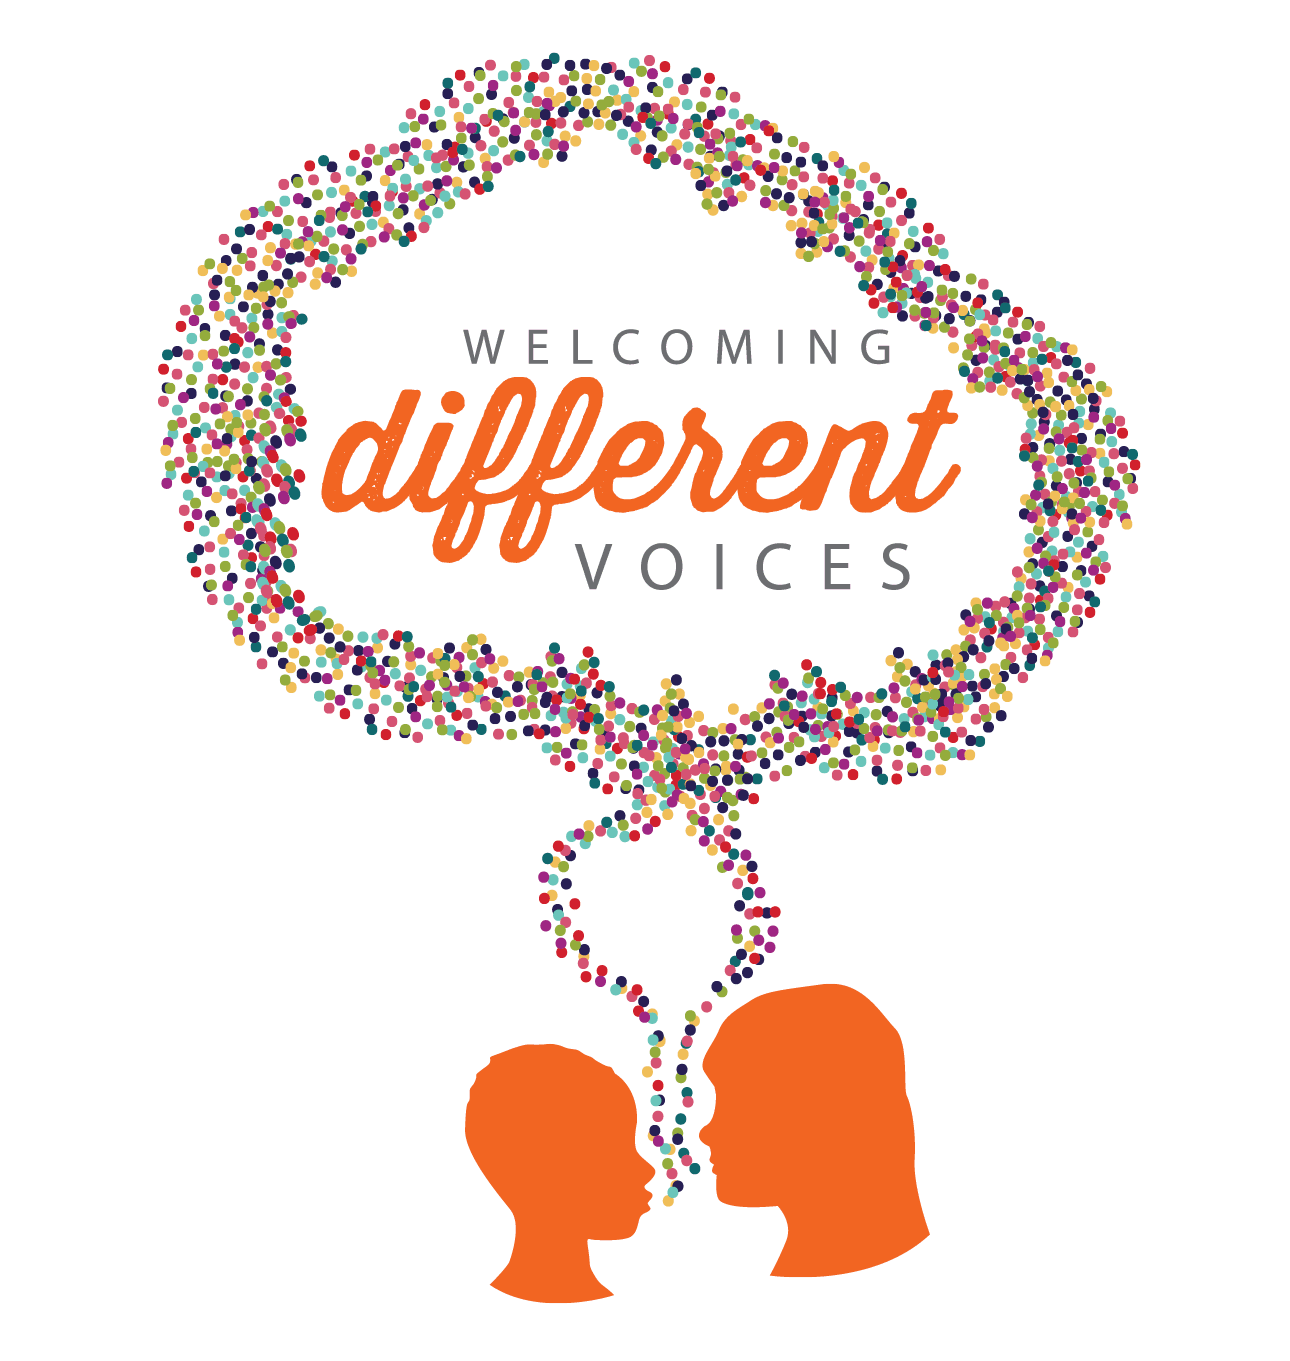 Welcoming Different Voices